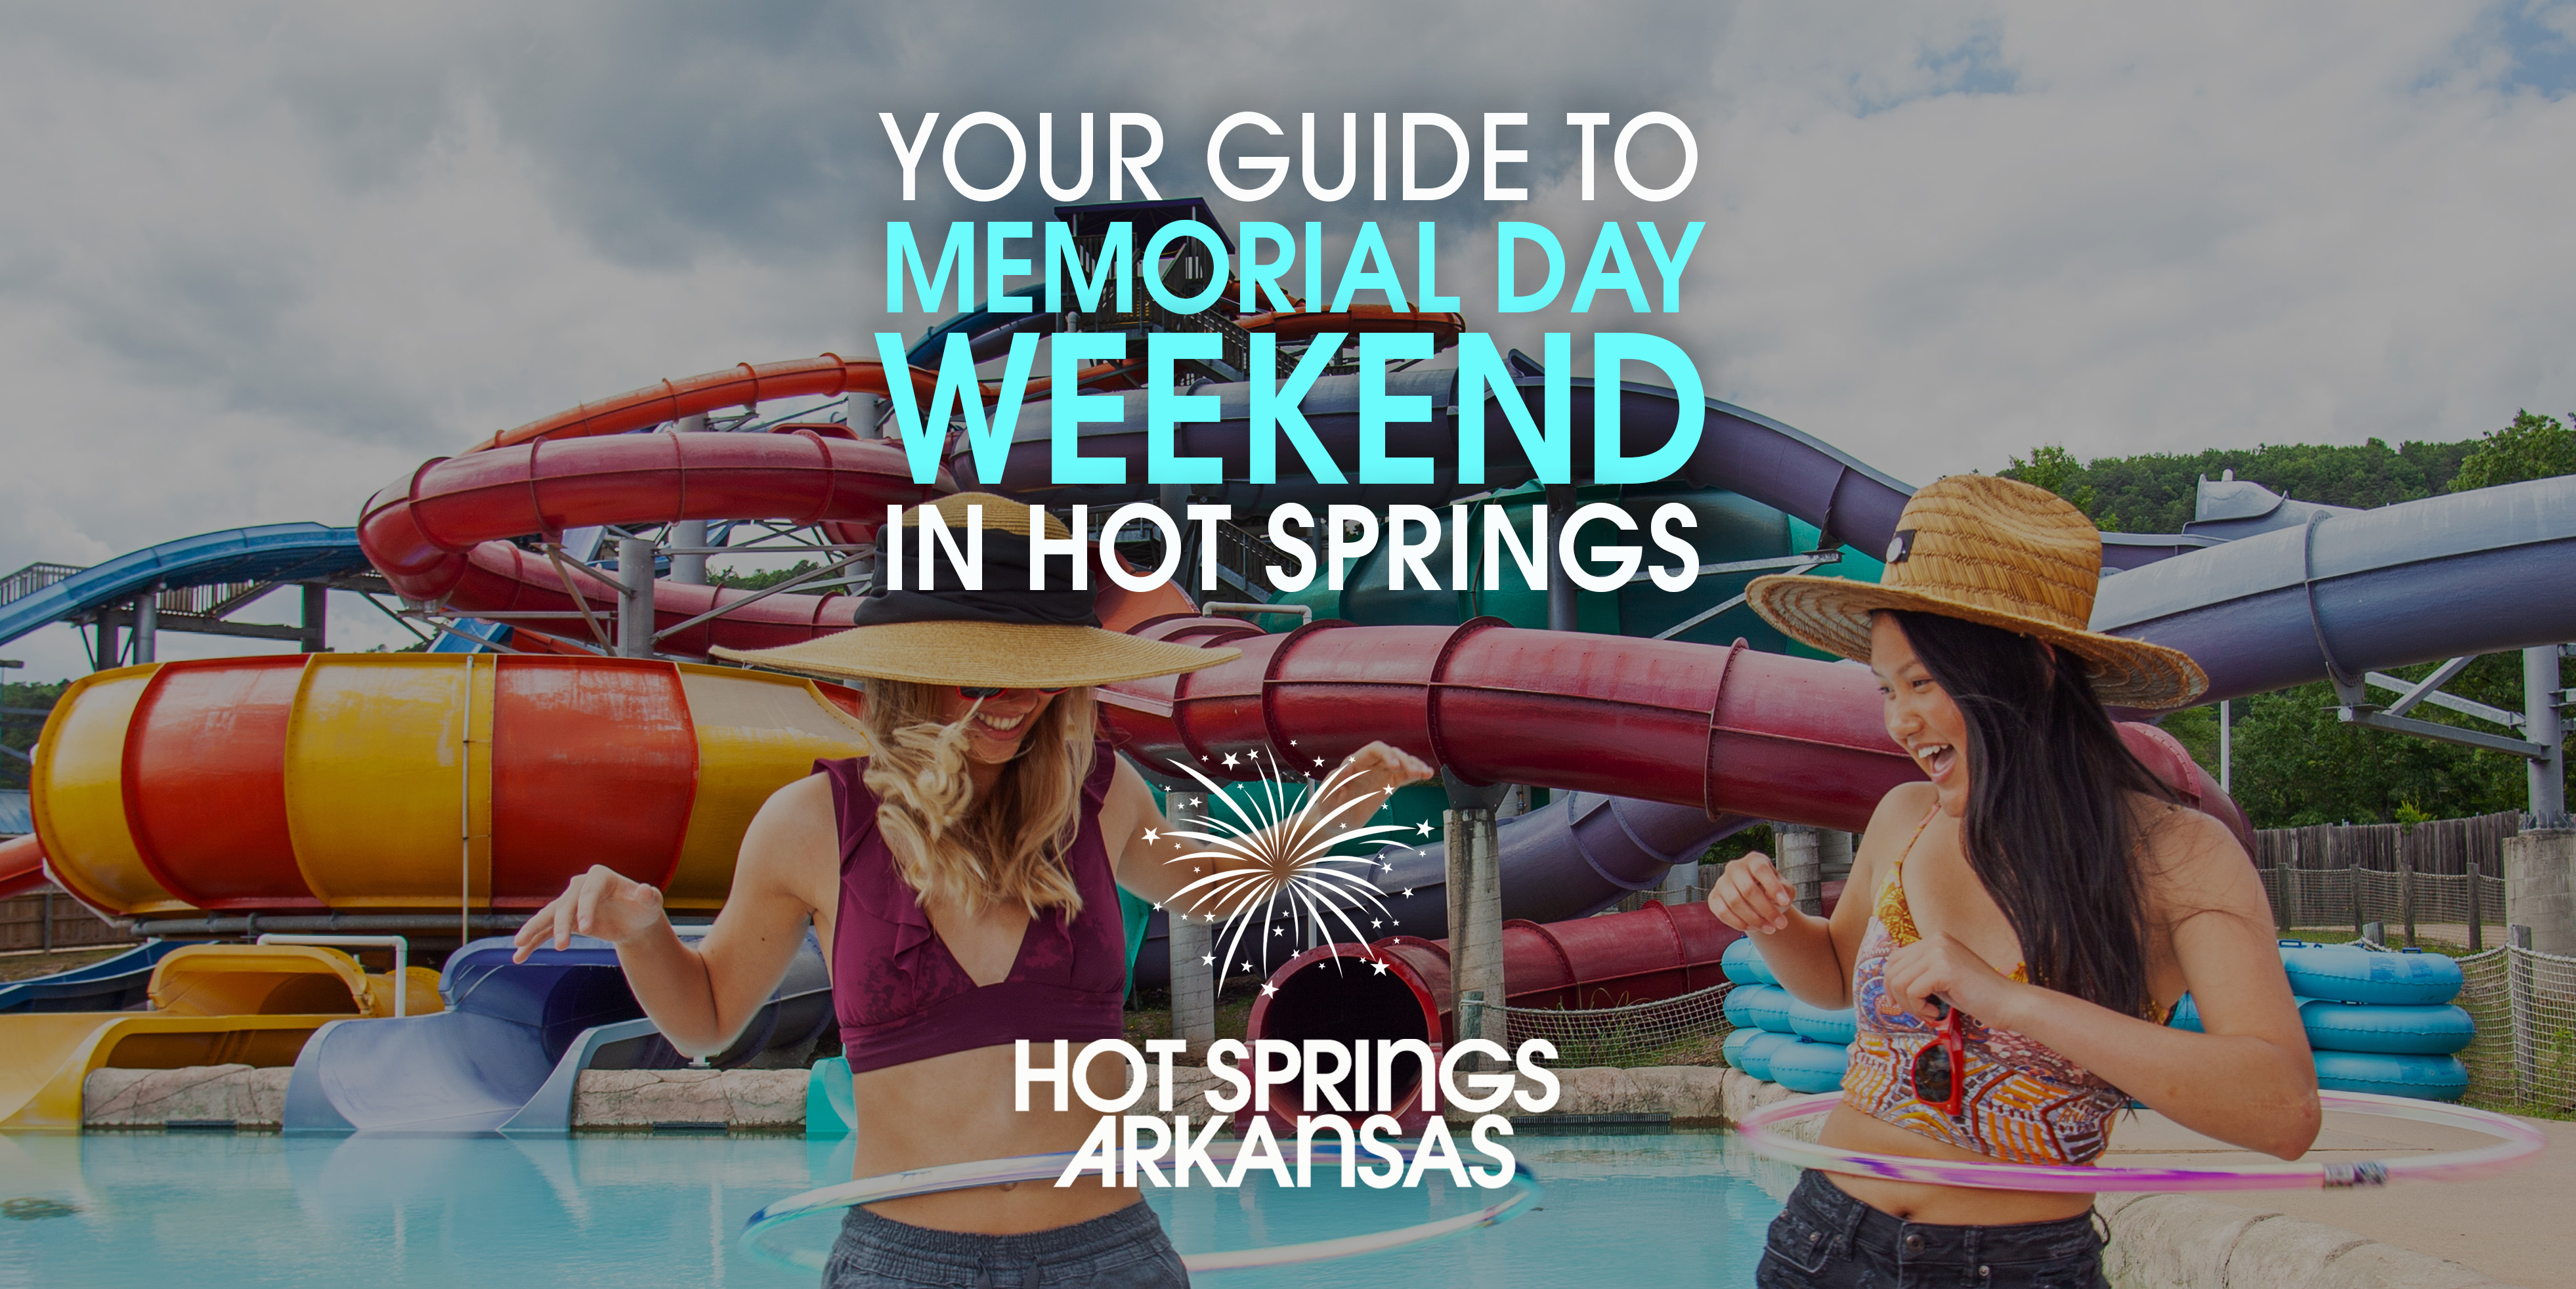 Your Guide to Memorial Day Weekend Hot Springs National Park